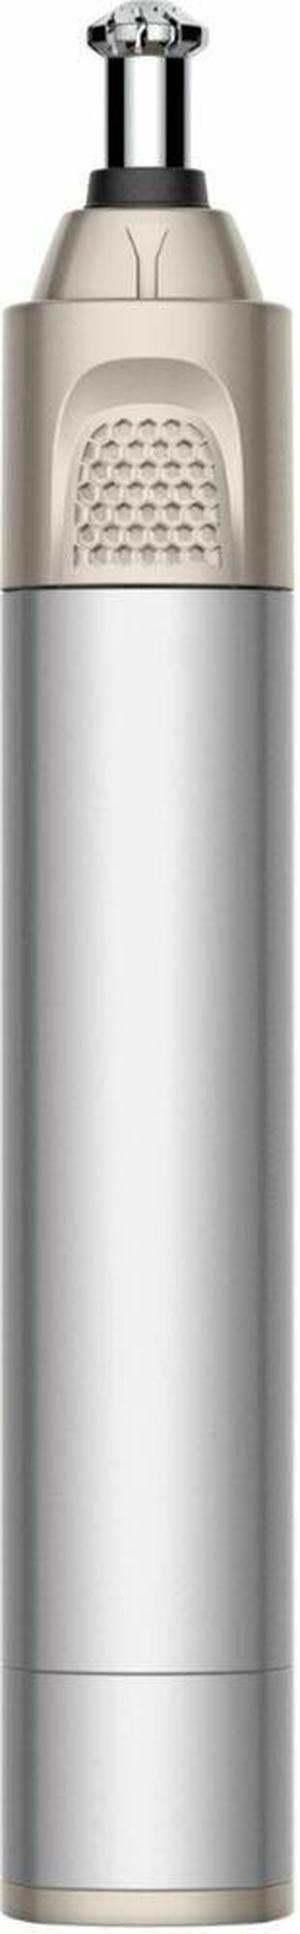 Conair - Metal Series High Performance Nose/Ear Trimmer Dry - Silver